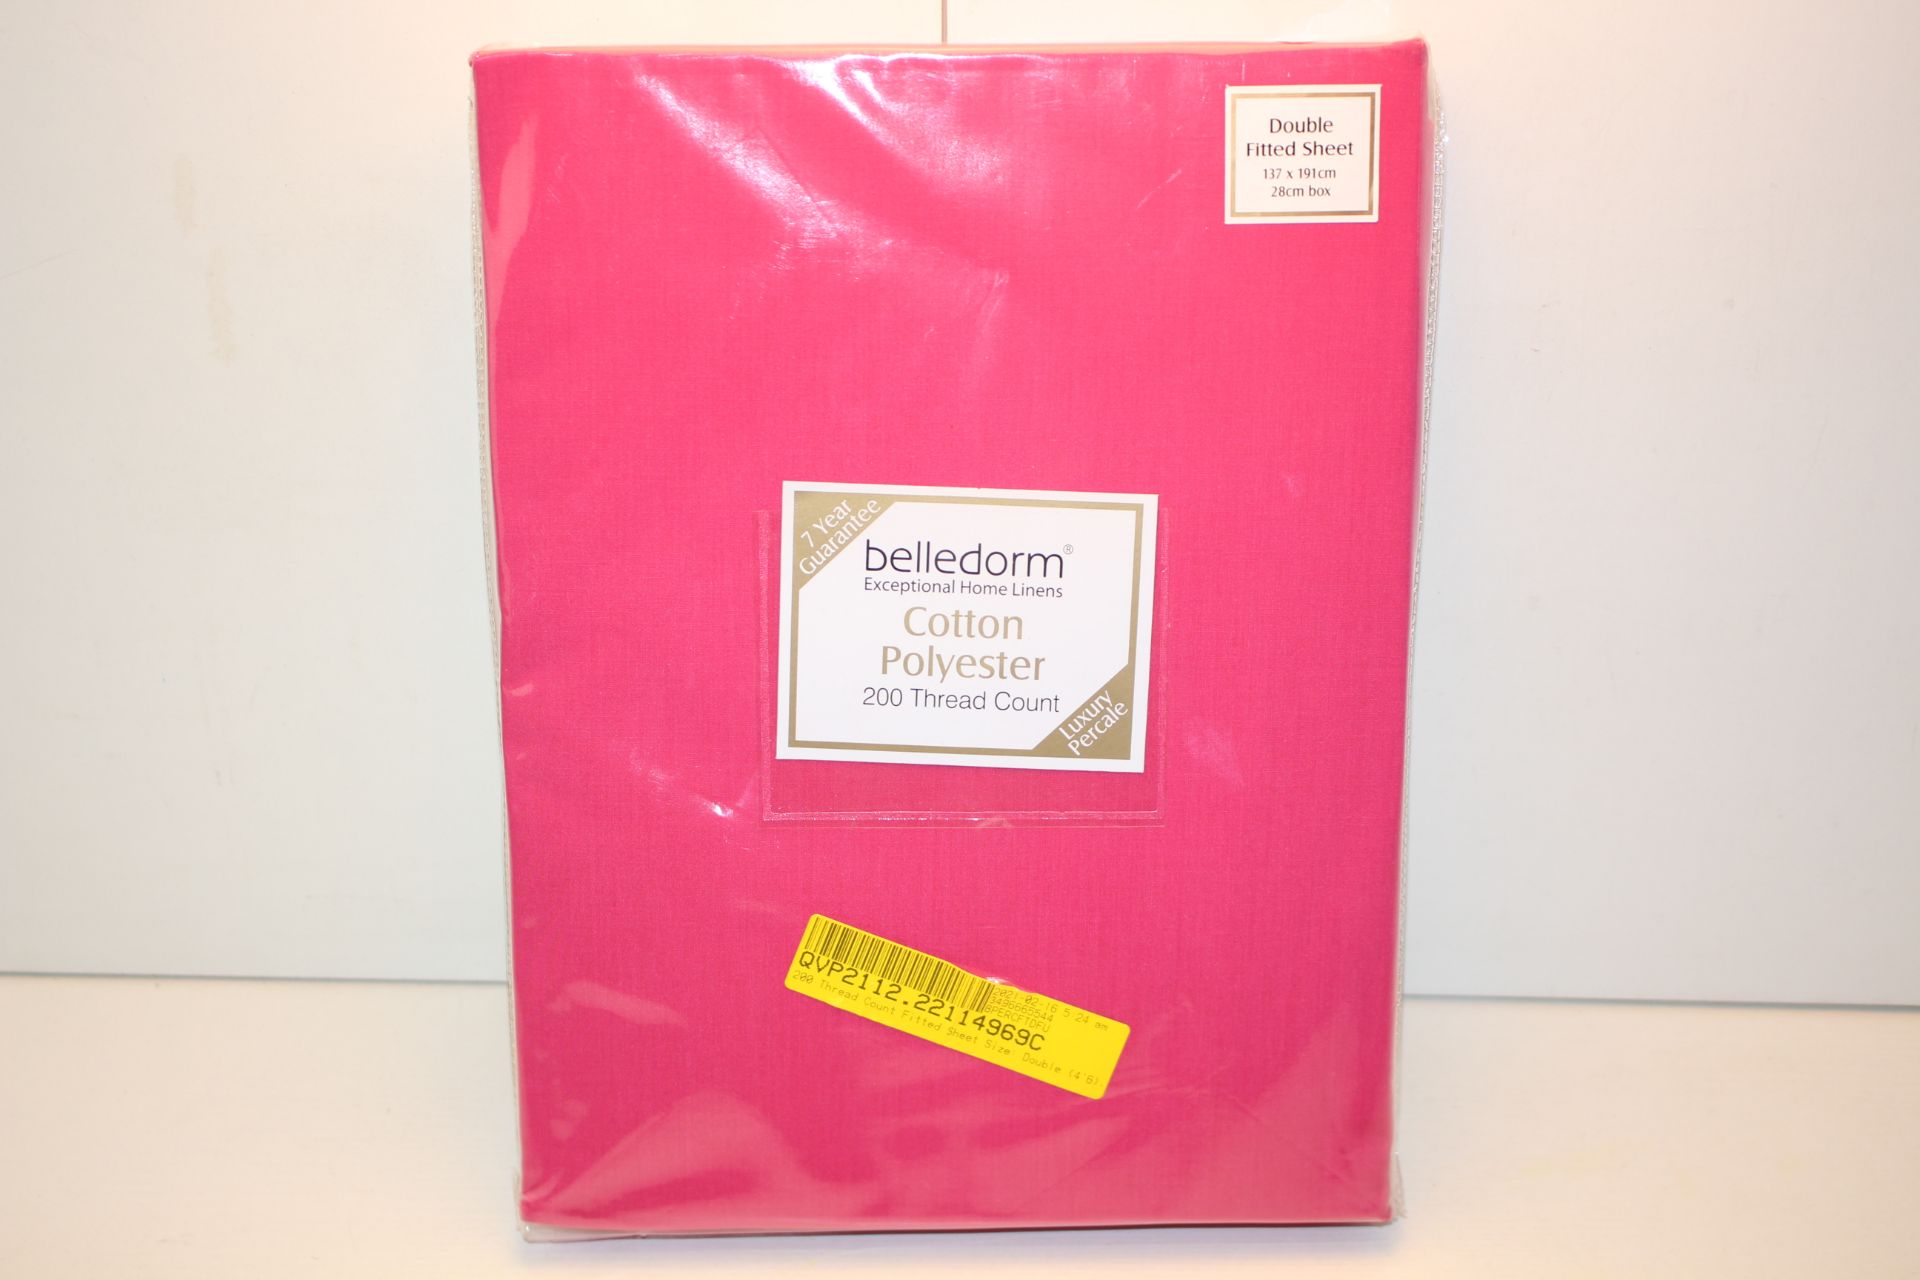 BAGGED BELLEDORM COTTON POLYESTER 200 THREAD COUNT DOUBLE FITTED SHEET RRP £19.99 (AS SEEN IN